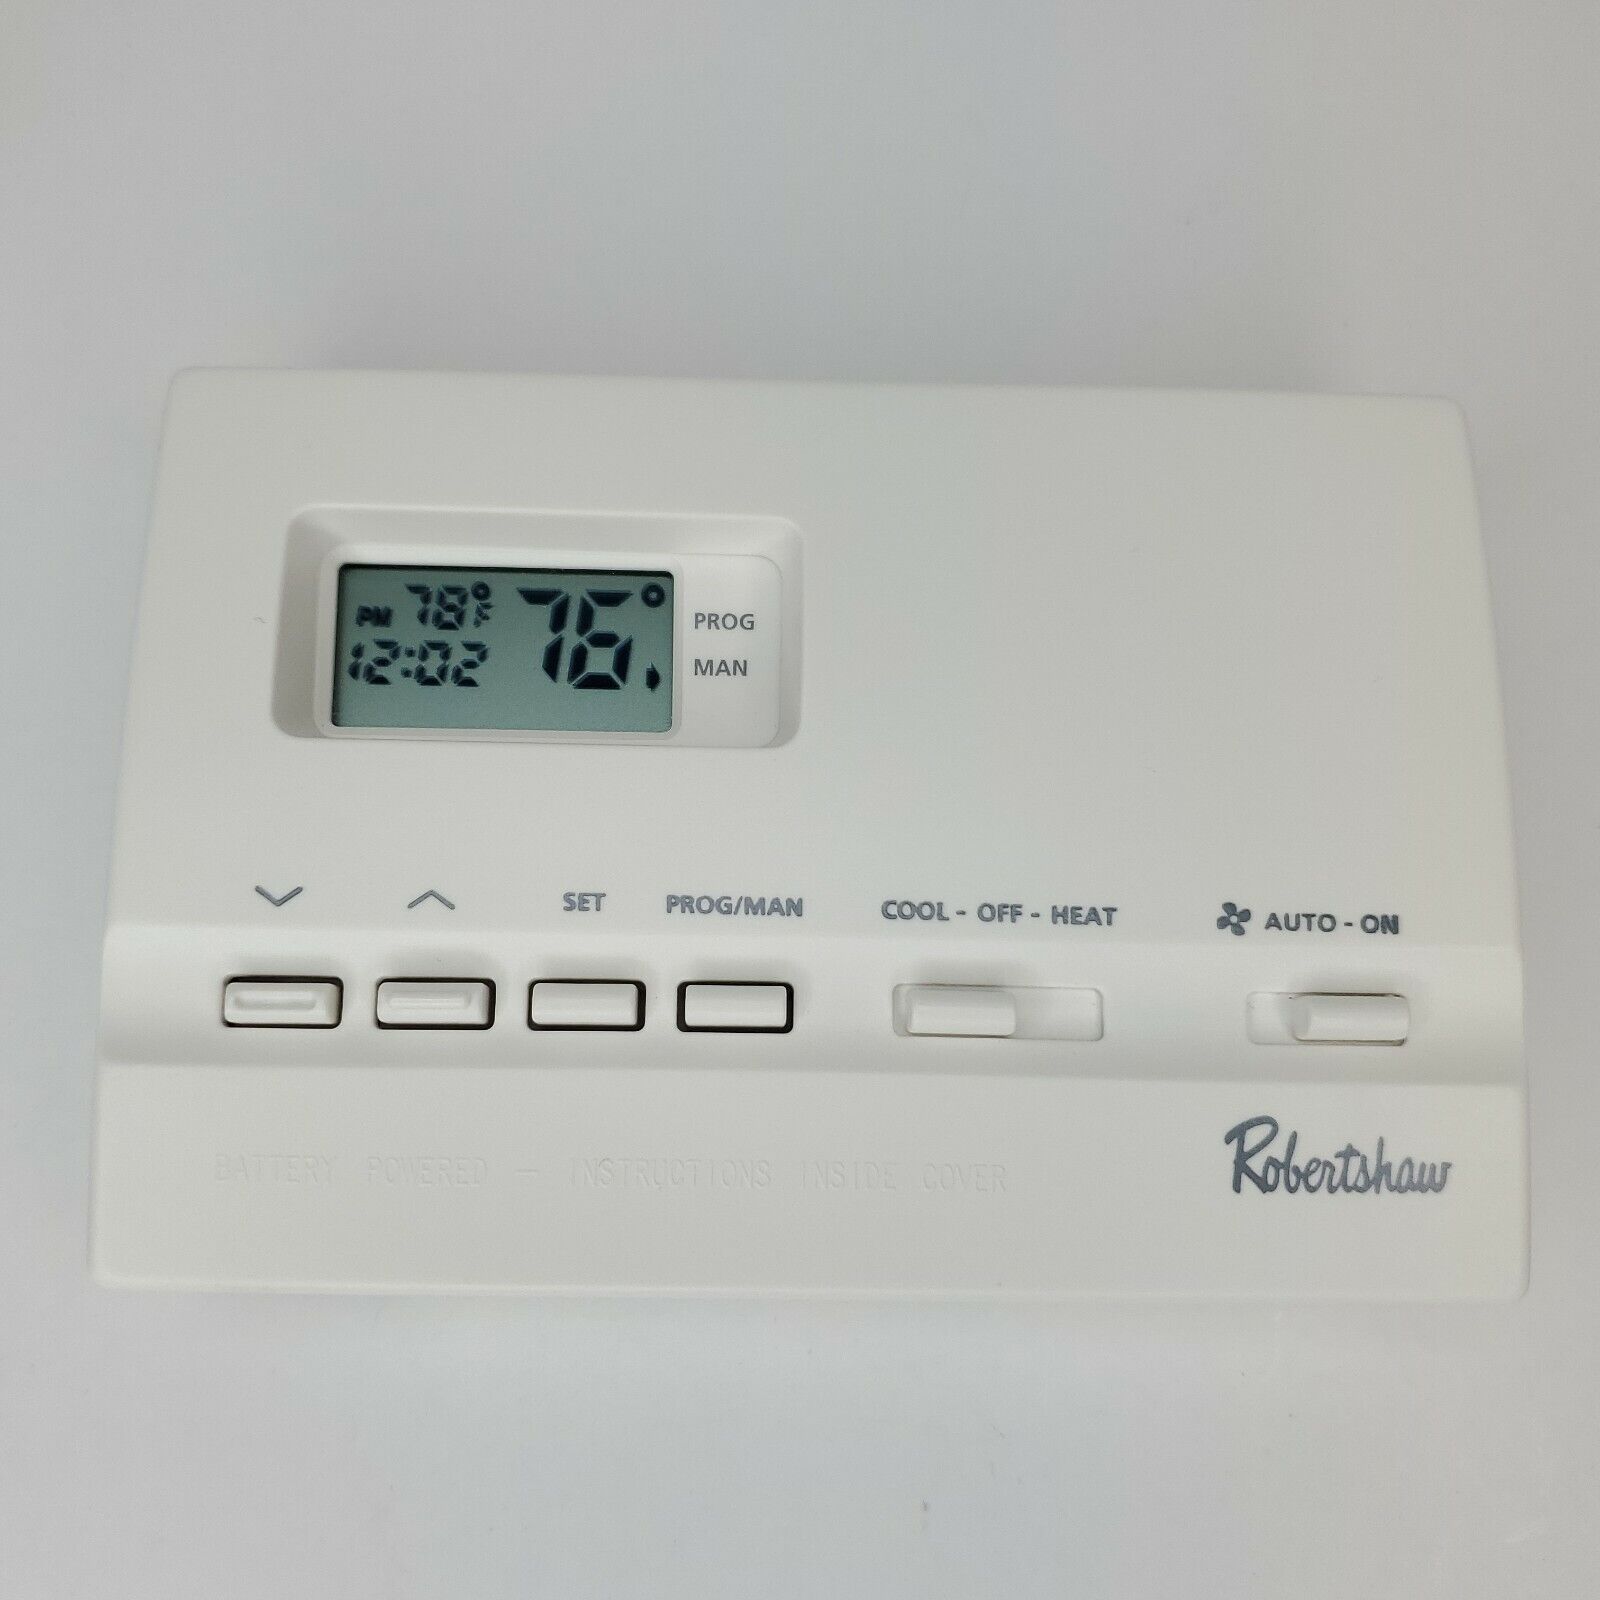 Robertshaw Digital Programmable Thermostat 9610 7 Day 1 Heat 1 Cool E G Energy